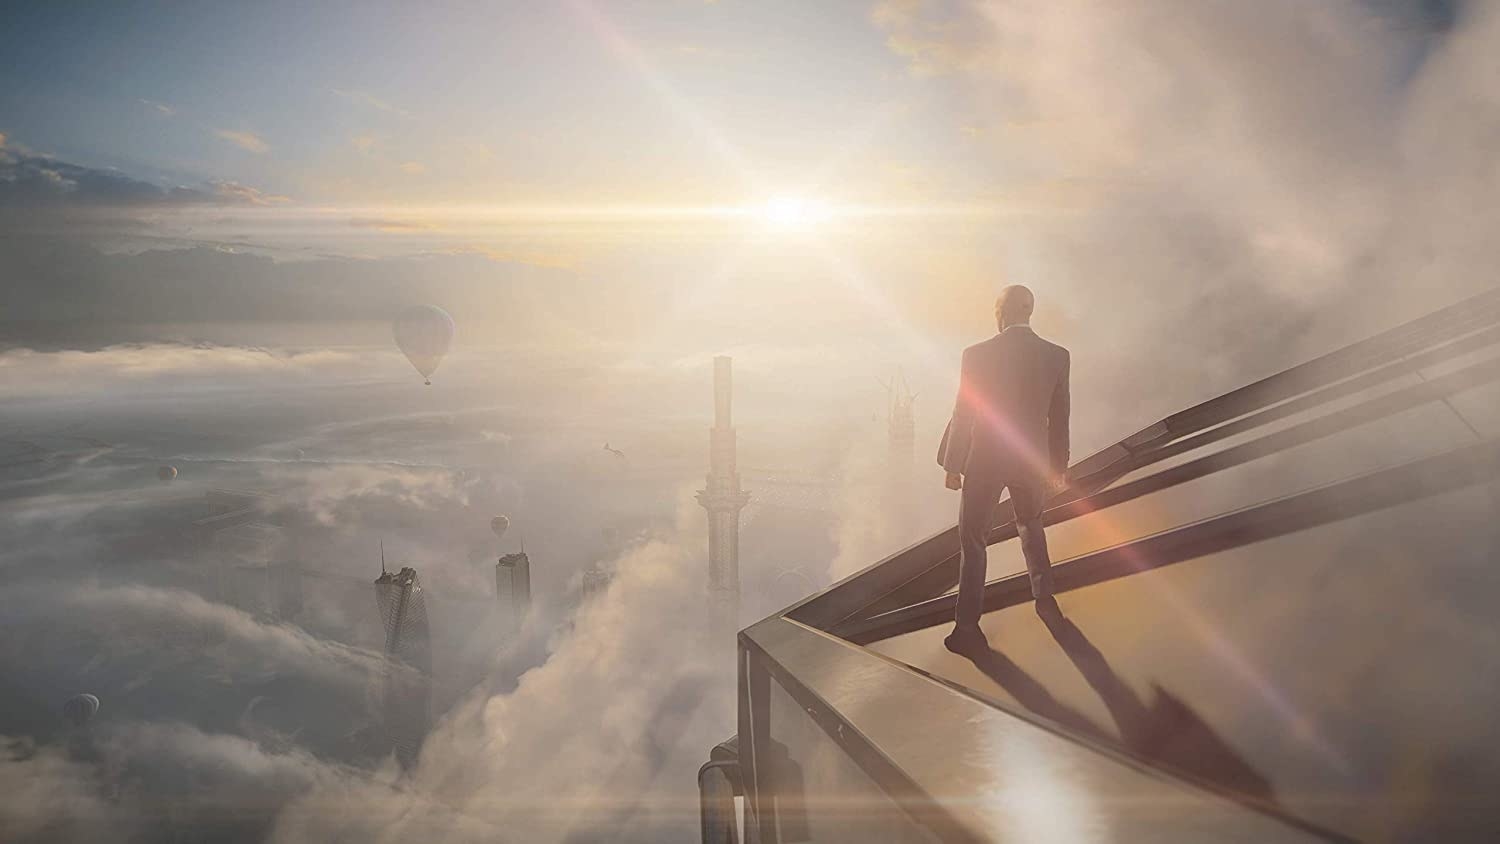 Agent 47 standing on a skyscraper